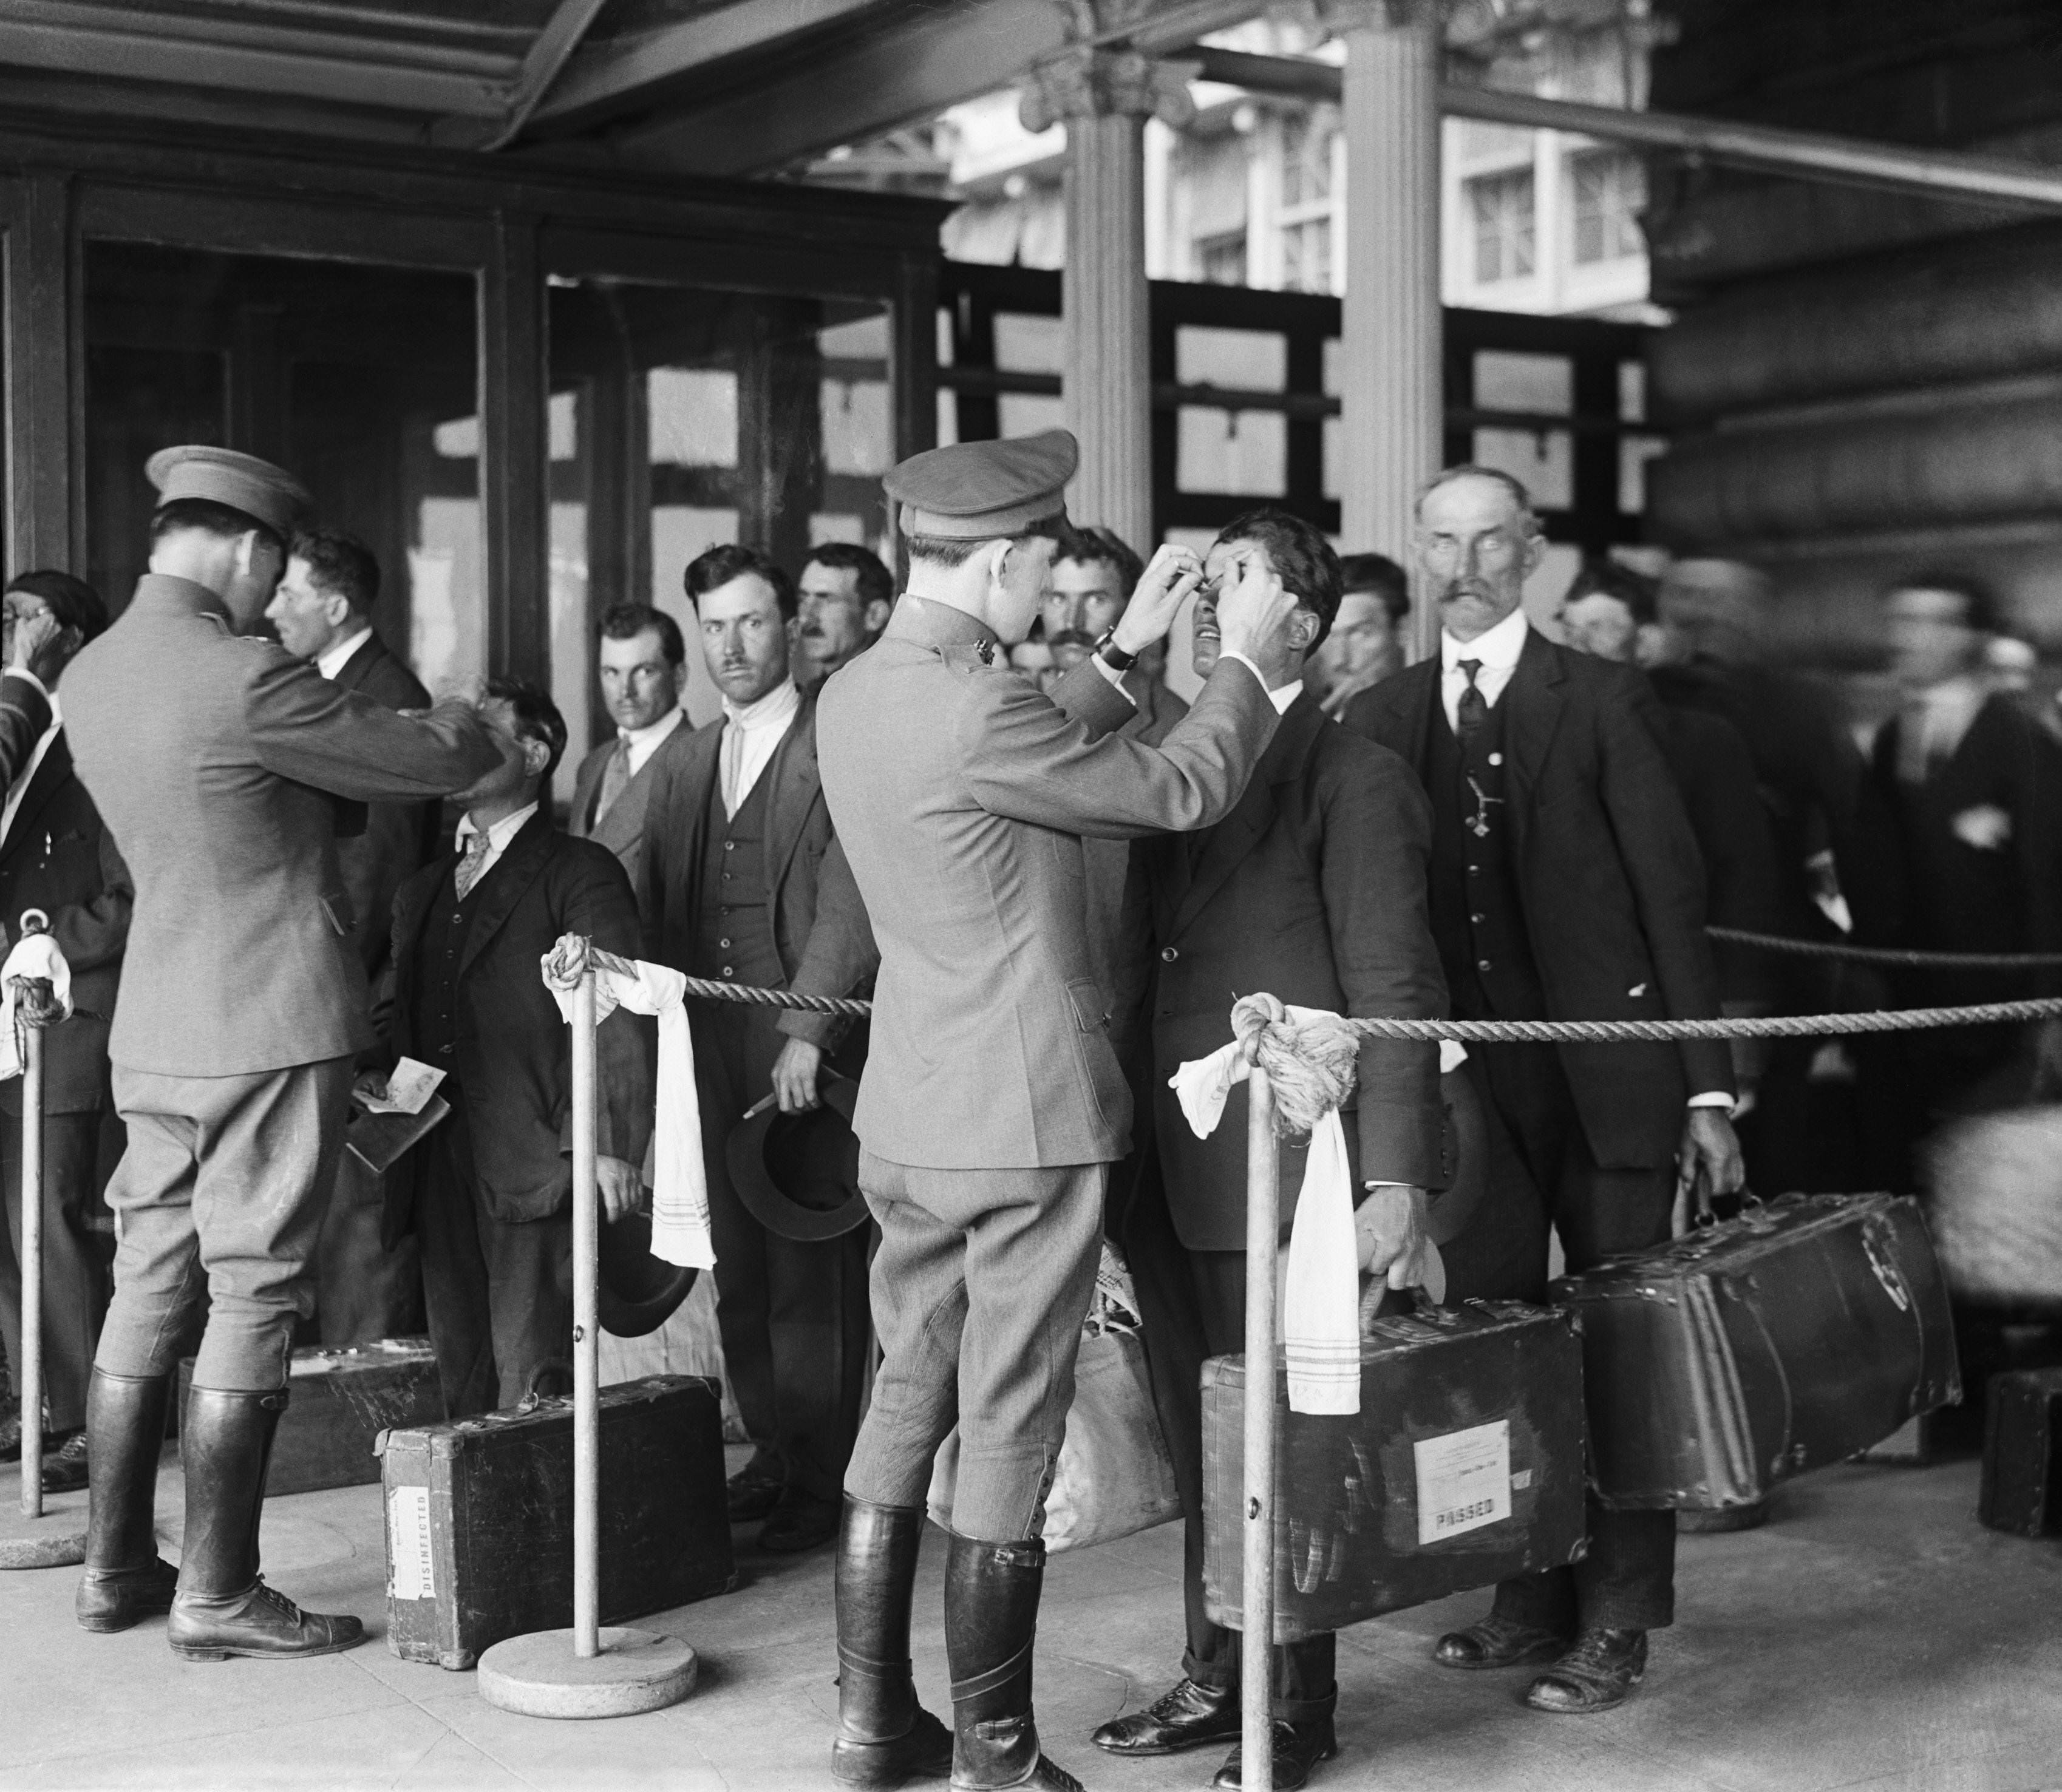 Officials looking for disease or lice on arriving immigrants at Ellis Island off New York City, US in 1923.